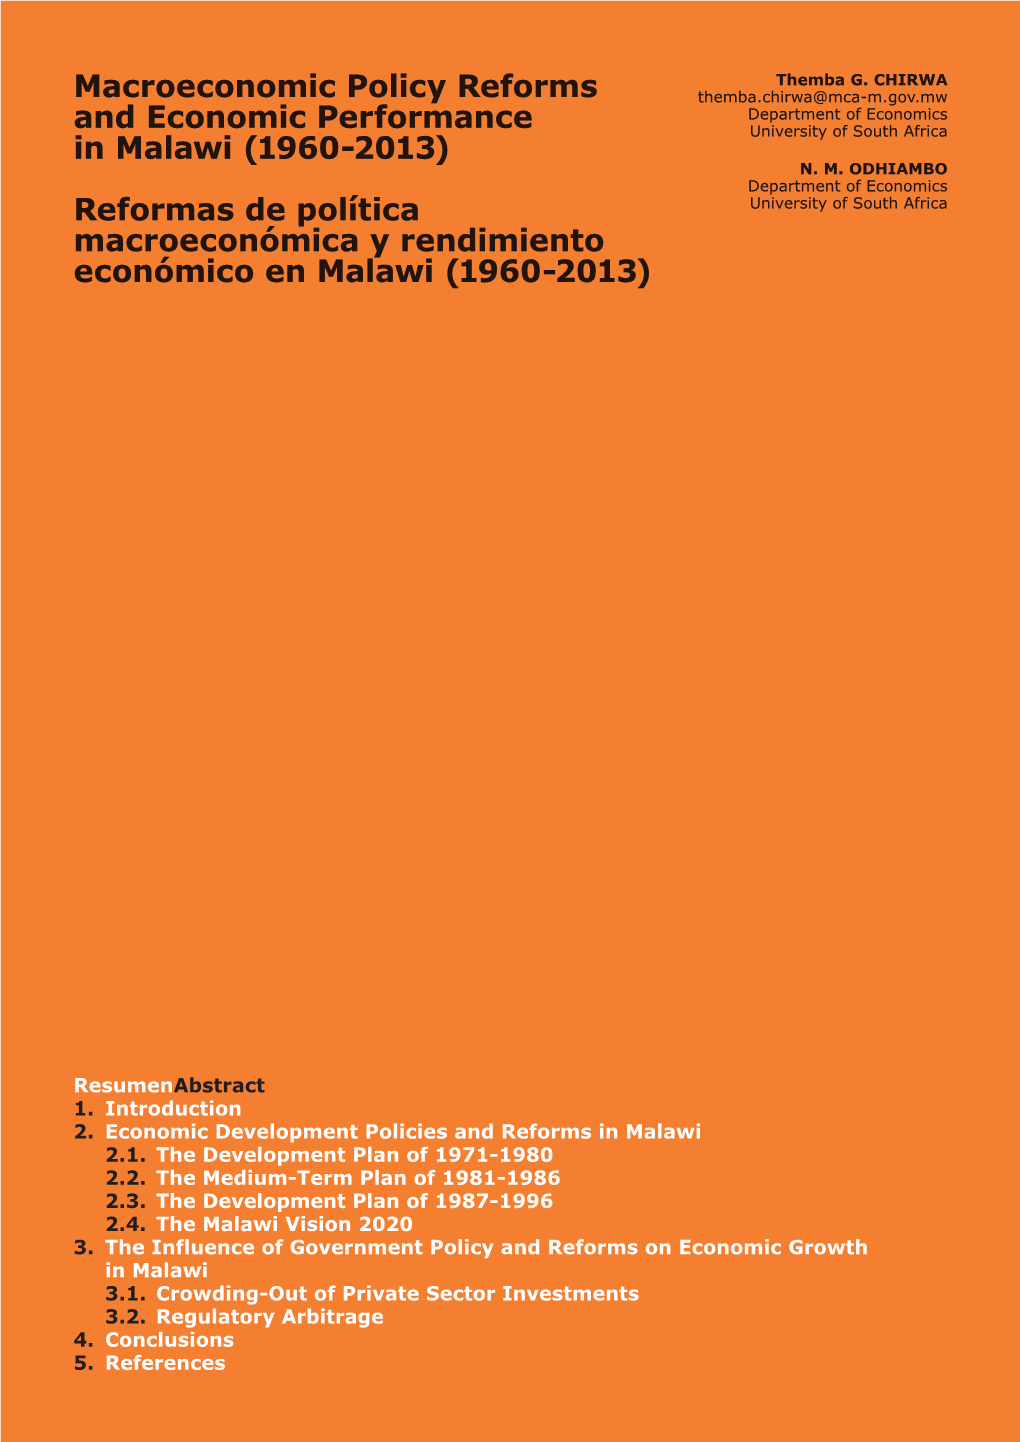 Macroeconomic Policy Reforms and Economic Performance in Malawi (1960-2013)